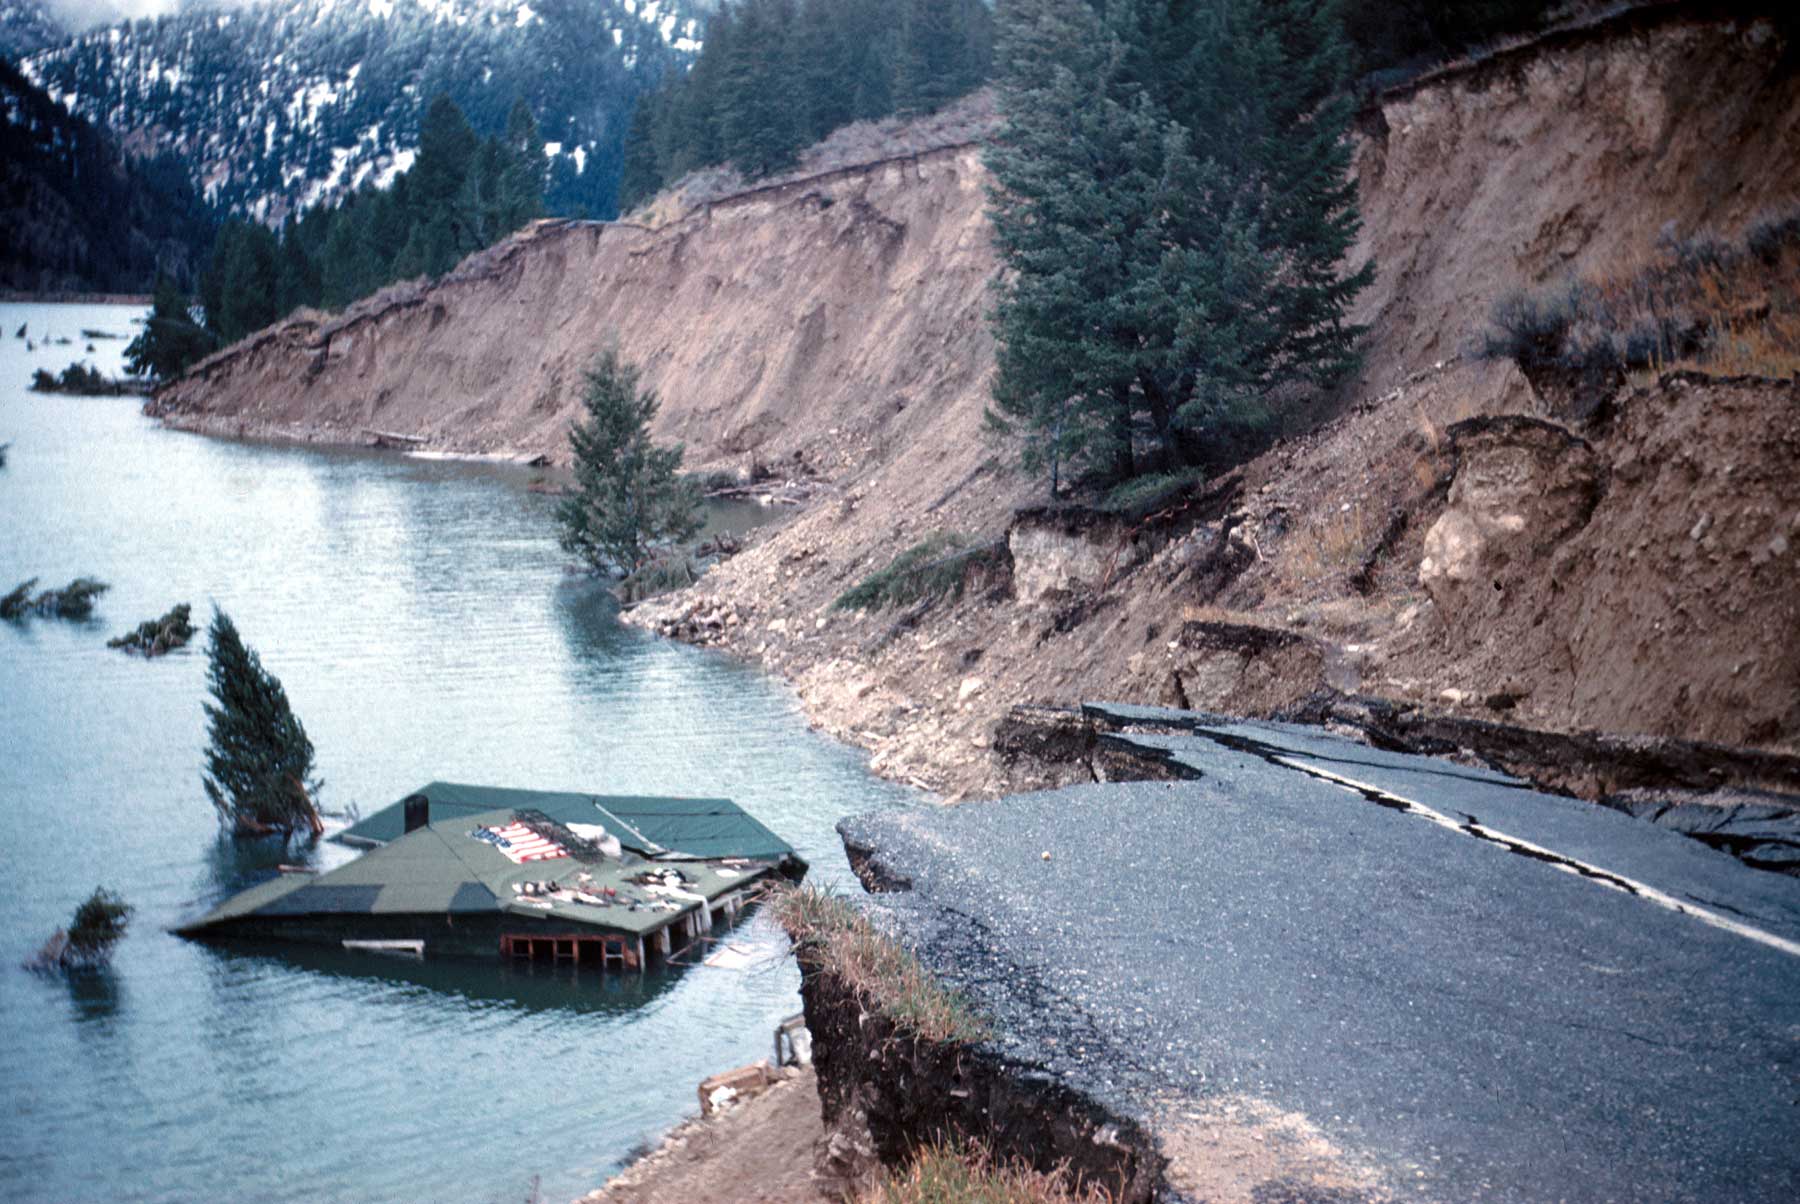 Photograph of damage to a road next to Hebgen Lake, Montana, which resulted from an earthquake.